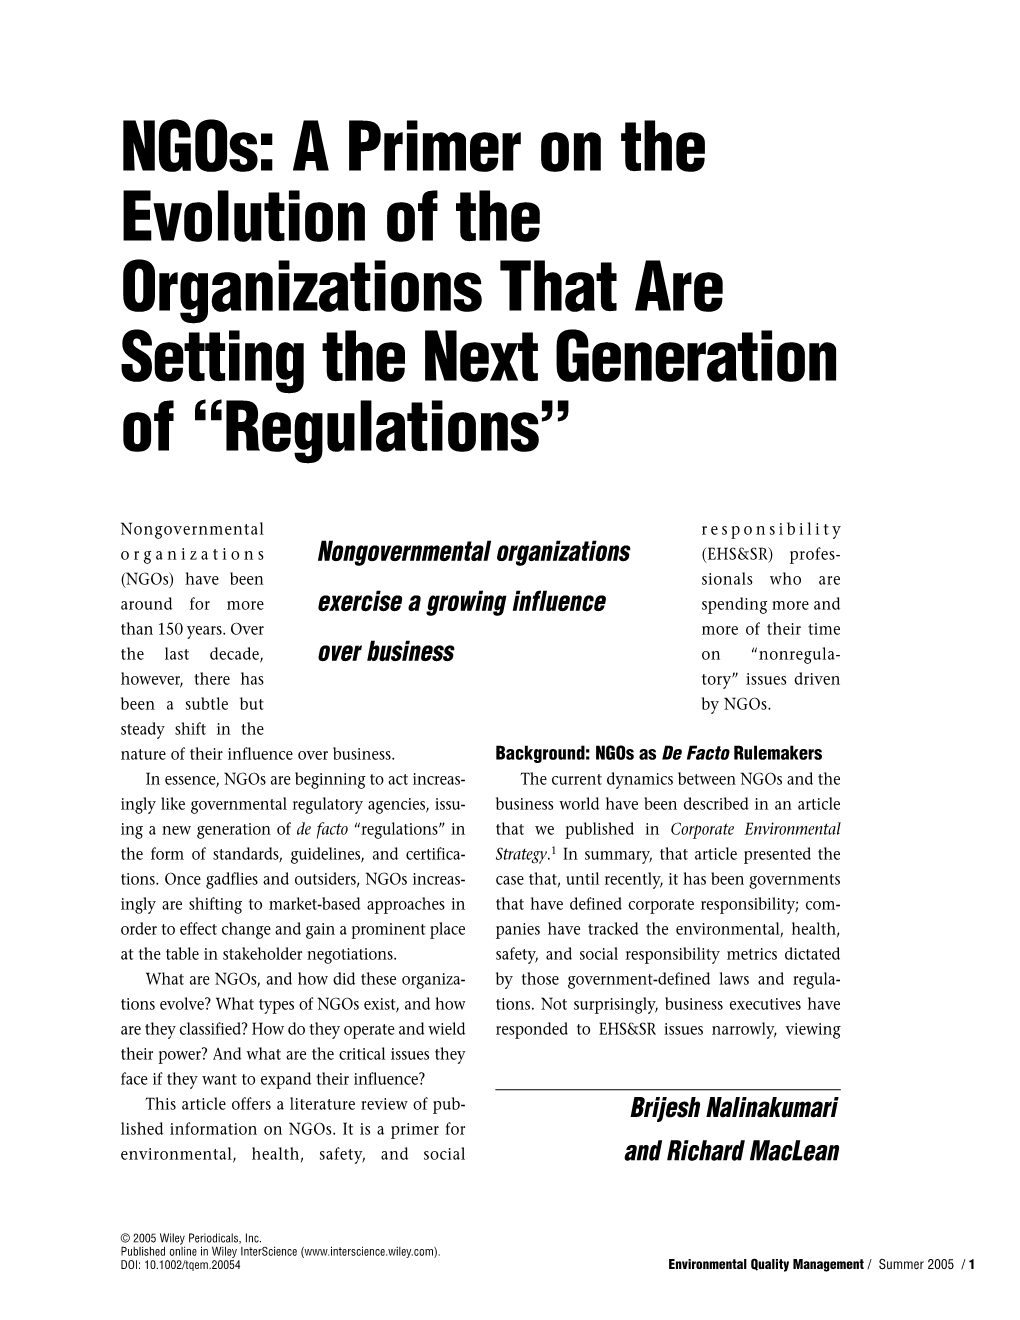 Ngos: a Primer on the Evolution of the Organizations That Are Setting the Next Generation of "Regulations"